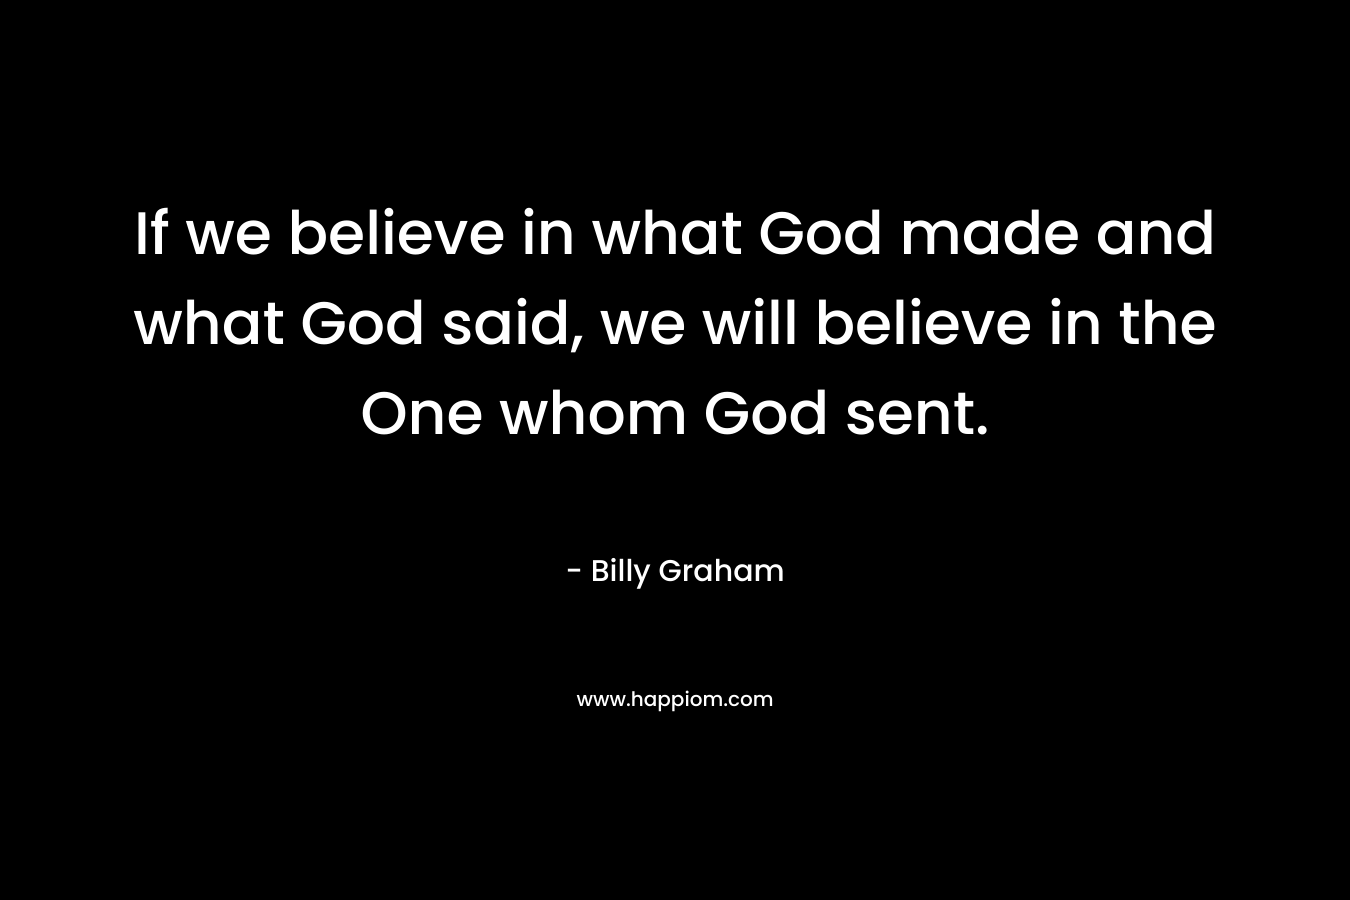 If we believe in what God made and what God said, we will believe in the One whom God sent.